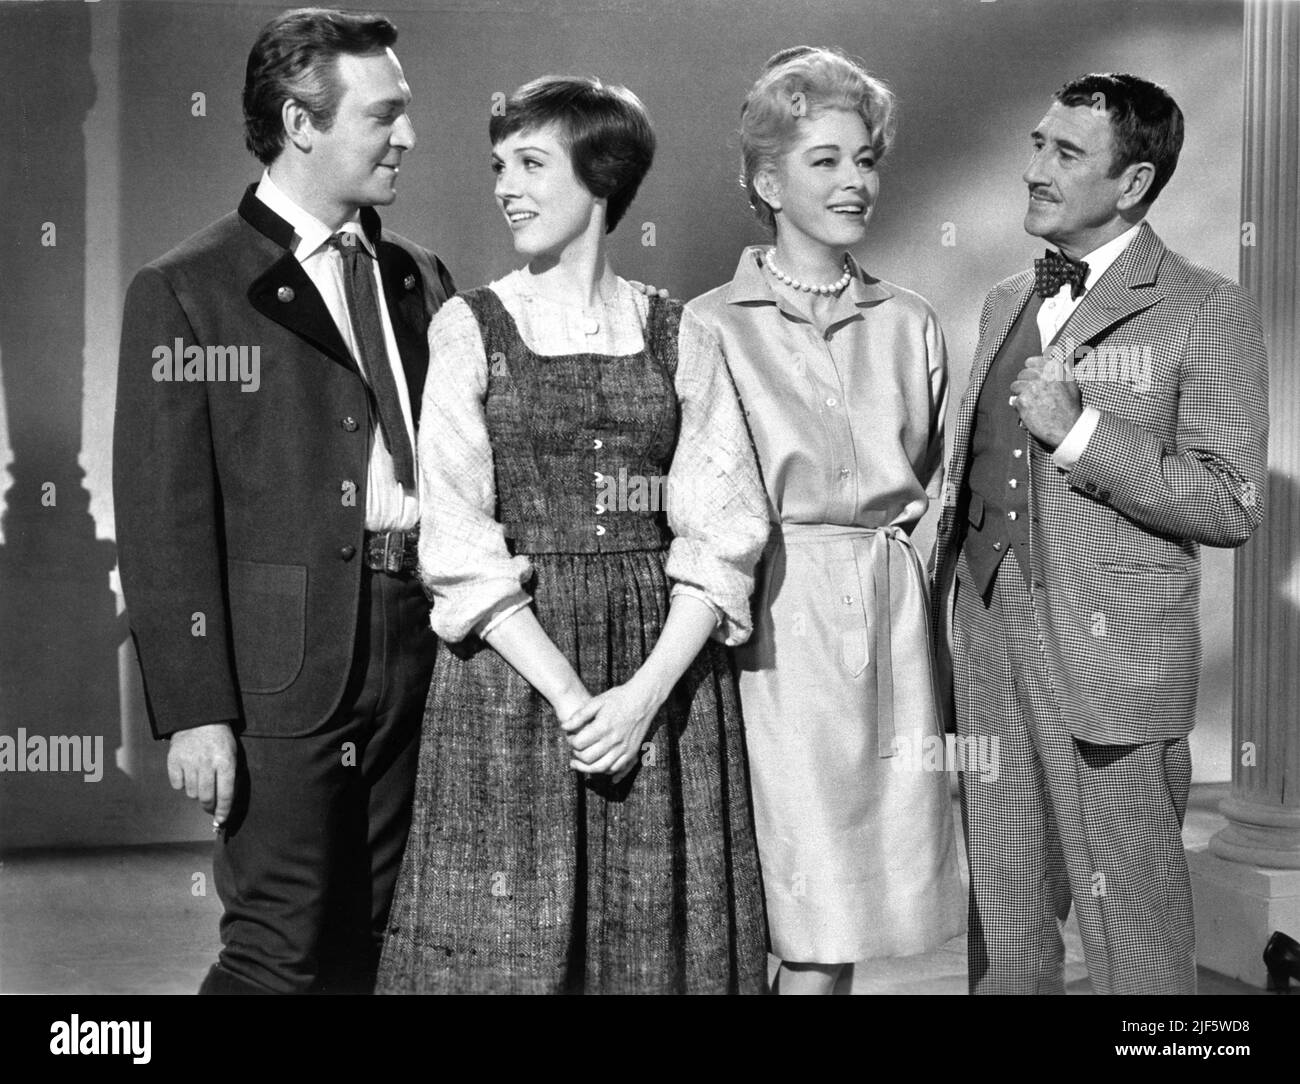 CHRISTOPHER PLUMMER JULIE ANDREWS ELEANOR PARKER and RICHARD HAYDN in one of 1st publicity portraits in costume for THE SOUND OF MUSIC 1965 director ROBERT WISE music Richard Rodgers lyrics Oscar Hammerstein II Robert Wise productions / Argyle Enterprises / Twentieth Century Fox Stock Photo